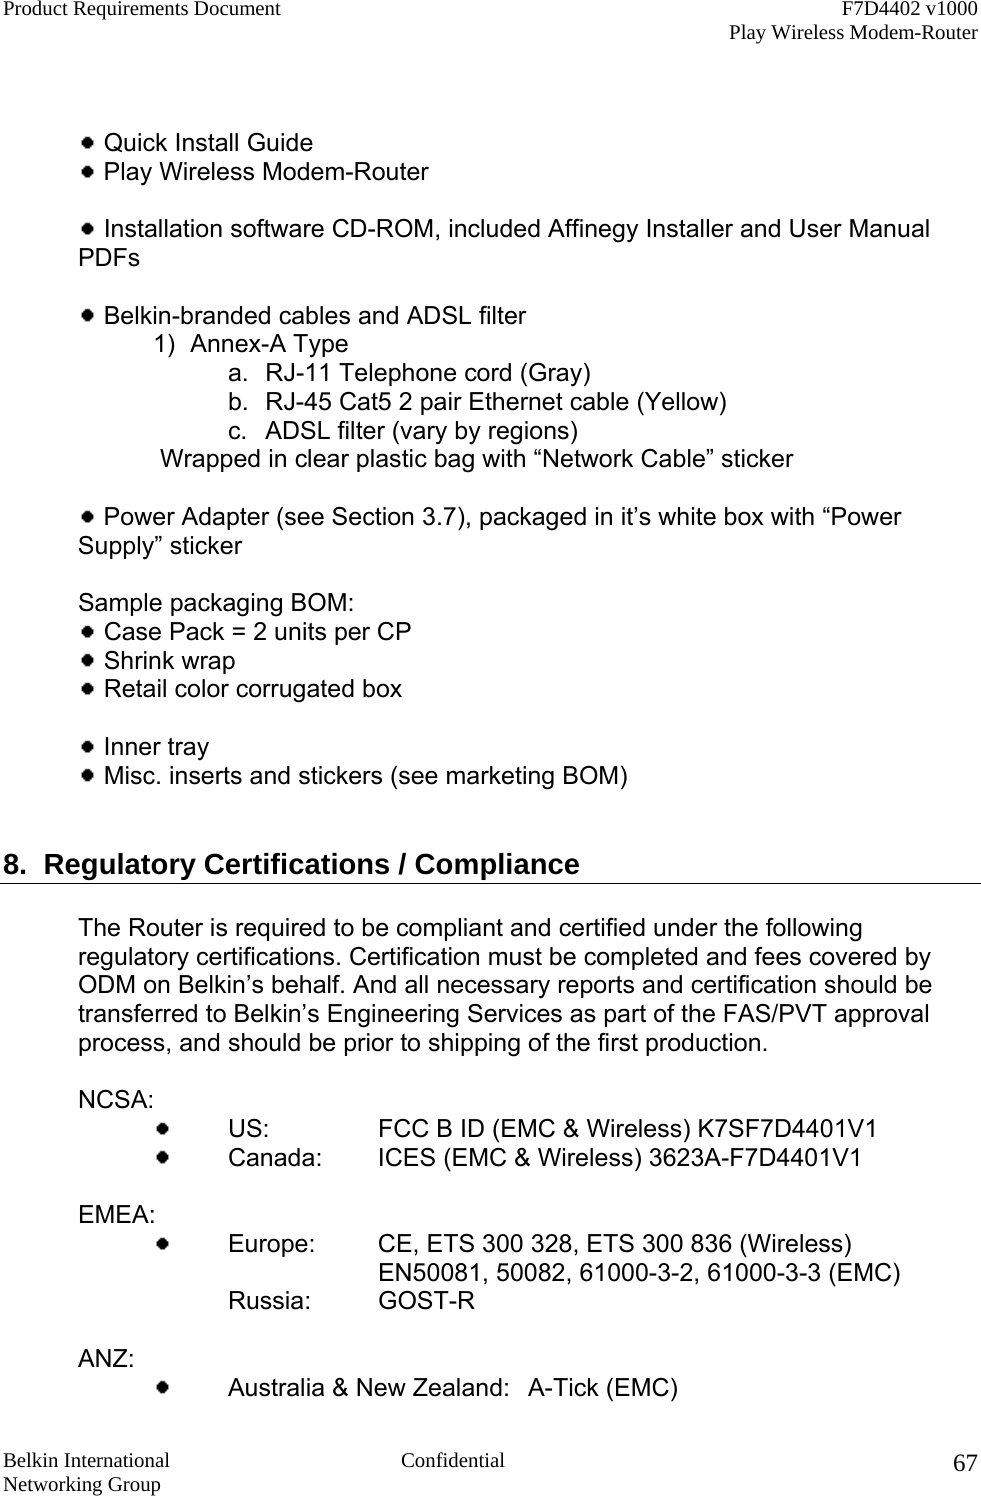 Product Requirements Document    F7D4402 v1000     Play Wireless Modem-Router  Belkin International  Confidential Networking Group 67   Quick Install Guide   Play Wireless Modem-Router    Installation software CD-ROM, included Affinegy Installer and User Manual PDFs   Belkin-branded cables and ADSL filter 1) Annex-A Type a.  RJ-11 Telephone cord (Gray) b.  RJ-45 Cat5 2 pair Ethernet cable (Yellow) c.  ADSL filter (vary by regions)    Wrapped in clear plastic bag with “Network Cable” sticker   Power Adapter (see Section 3.7), packaged in it’s white box with “Power Supply” sticker    Sample packaging BOM:  Case Pack = 2 units per CP  Shrink wrap   Retail color corrugated box    Inner tray   Misc. inserts and stickers (see marketing BOM)   8.  Regulatory Certifications / Compliance  The Router is required to be compliant and certified under the following regulatory certifications. Certification must be completed and fees covered by ODM on Belkin’s behalf. And all necessary reports and certification should be transferred to Belkin’s Engineering Services as part of the FAS/PVT approval process, and should be prior to shipping of the first production.   NCSA:      US:    FCC B ID (EMC &amp; Wireless) K7SF7D4401V1      Canada:  ICES (EMC &amp; Wireless) 3623A-F7D4401V1    EMEA:      Europe:   CE, ETS 300 328, ETS 300 836 (Wireless)      EN50081, 50082, 61000-3-2, 61000-3-3 (EMC)    Russia: GOST-R   ANZ:      Australia &amp; New Zealand:  A-Tick (EMC) 